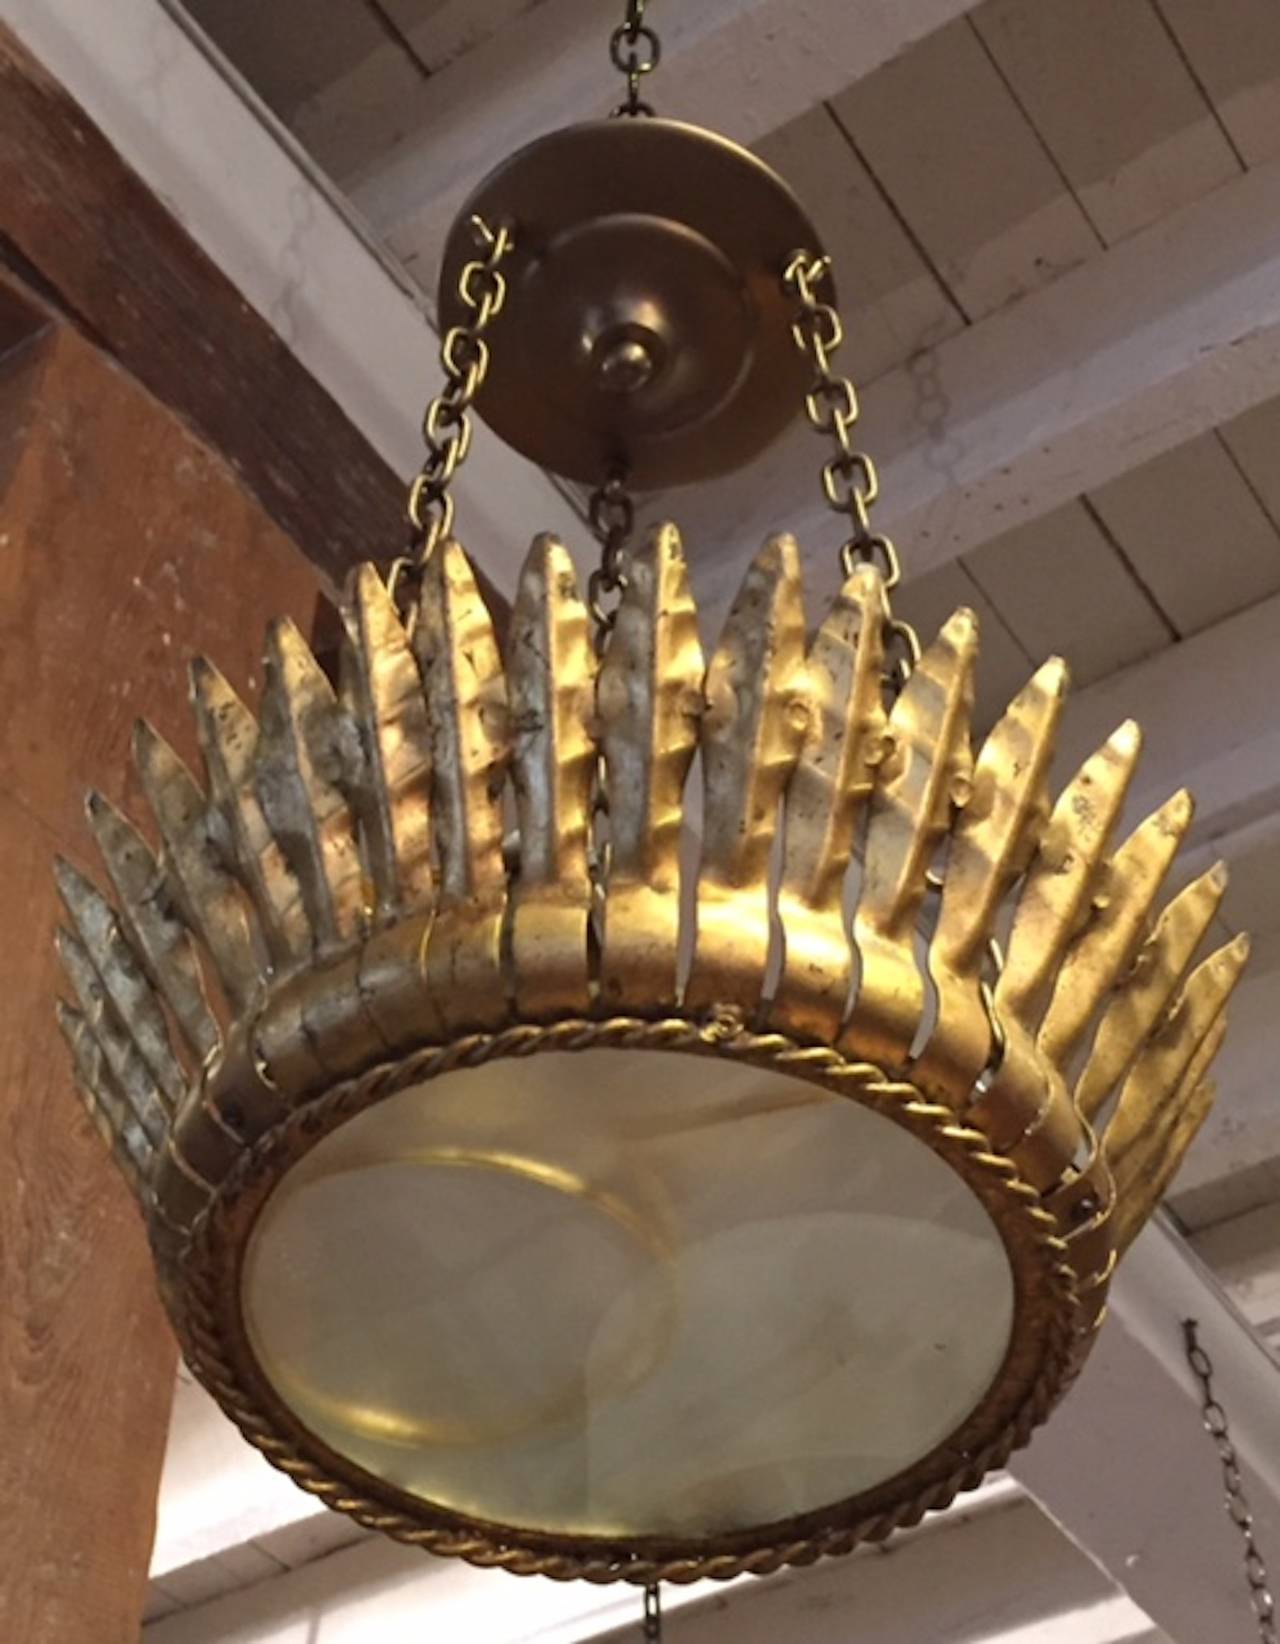 1940s Spanish gold gild metal chandelier that resembles a crown.
Gold gilt metal feathers create the crown with a gold gilt twist surrounding the rim. A smoked glass disc at the bottom of the pendant light hides the bulbs inside.
Three chains are